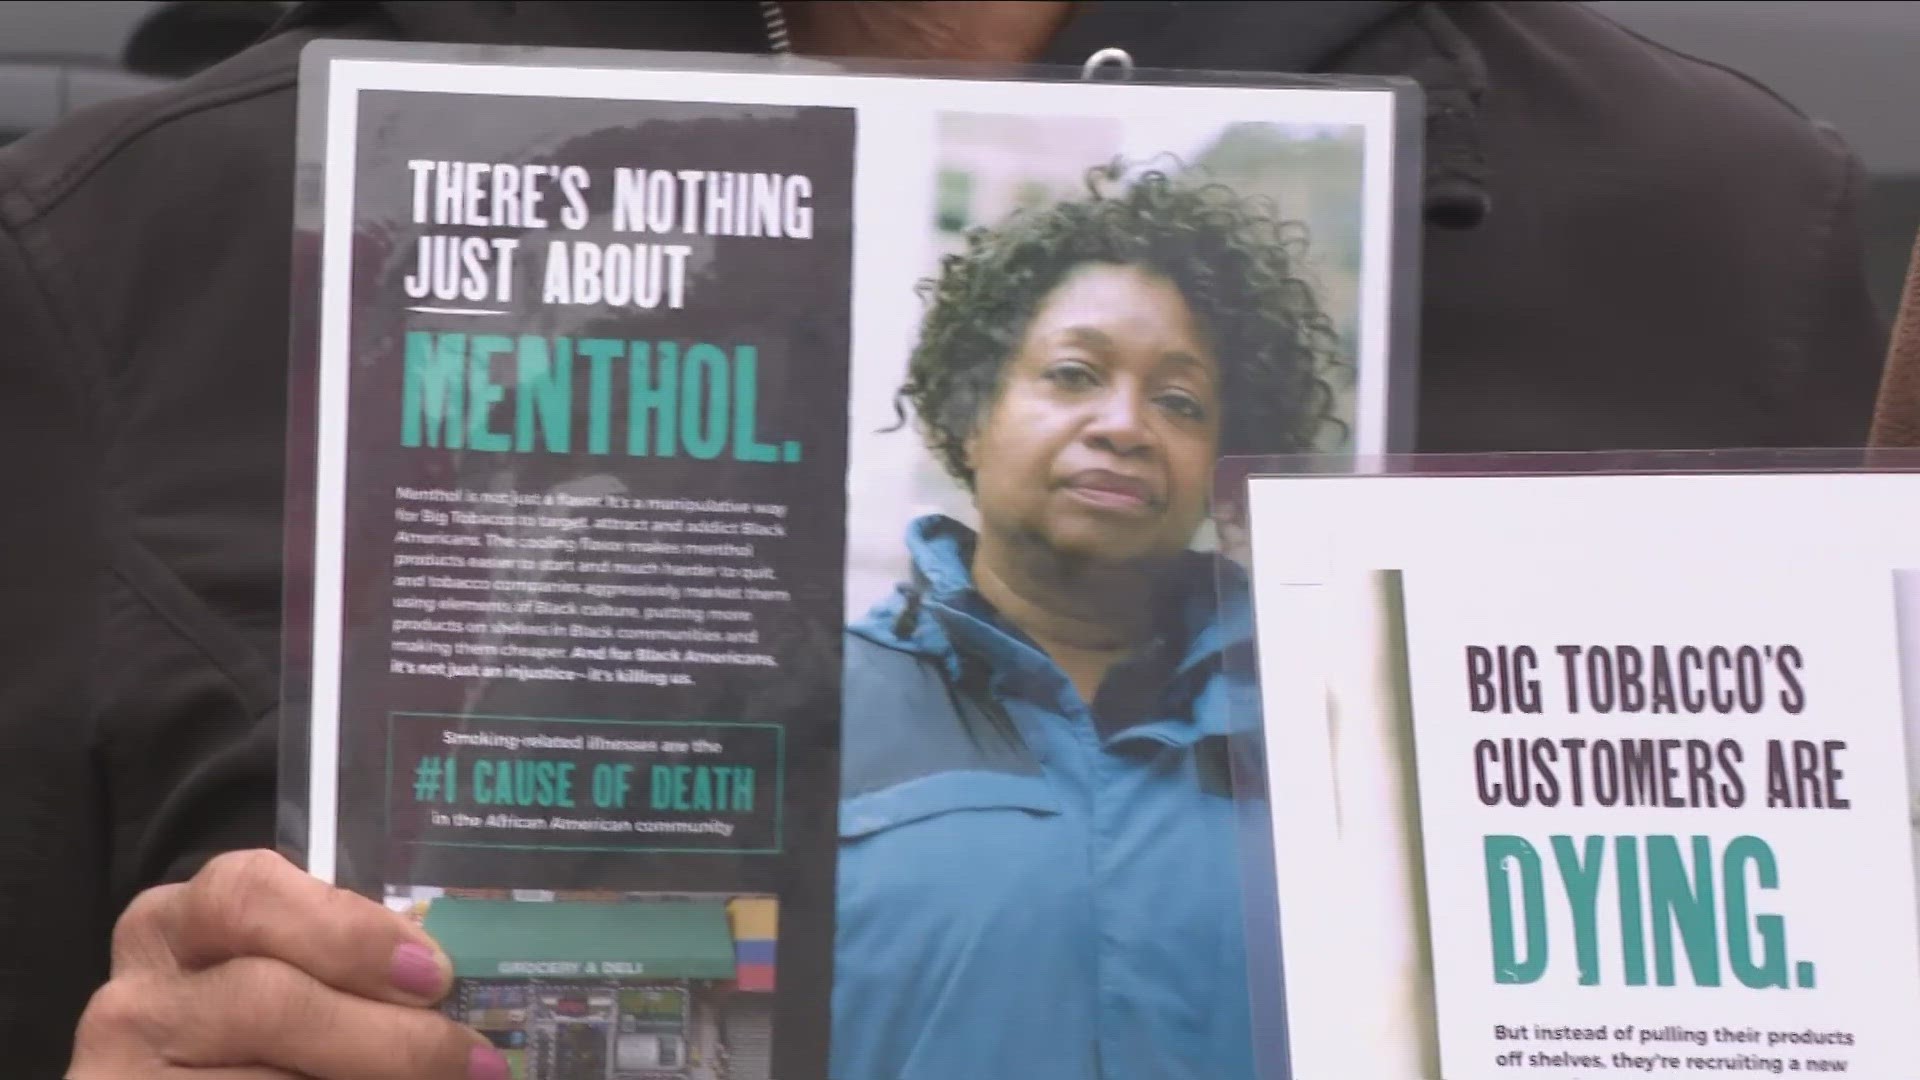 Black Lives, Black Lungs event to discuss the menthol ban will take place tonight.